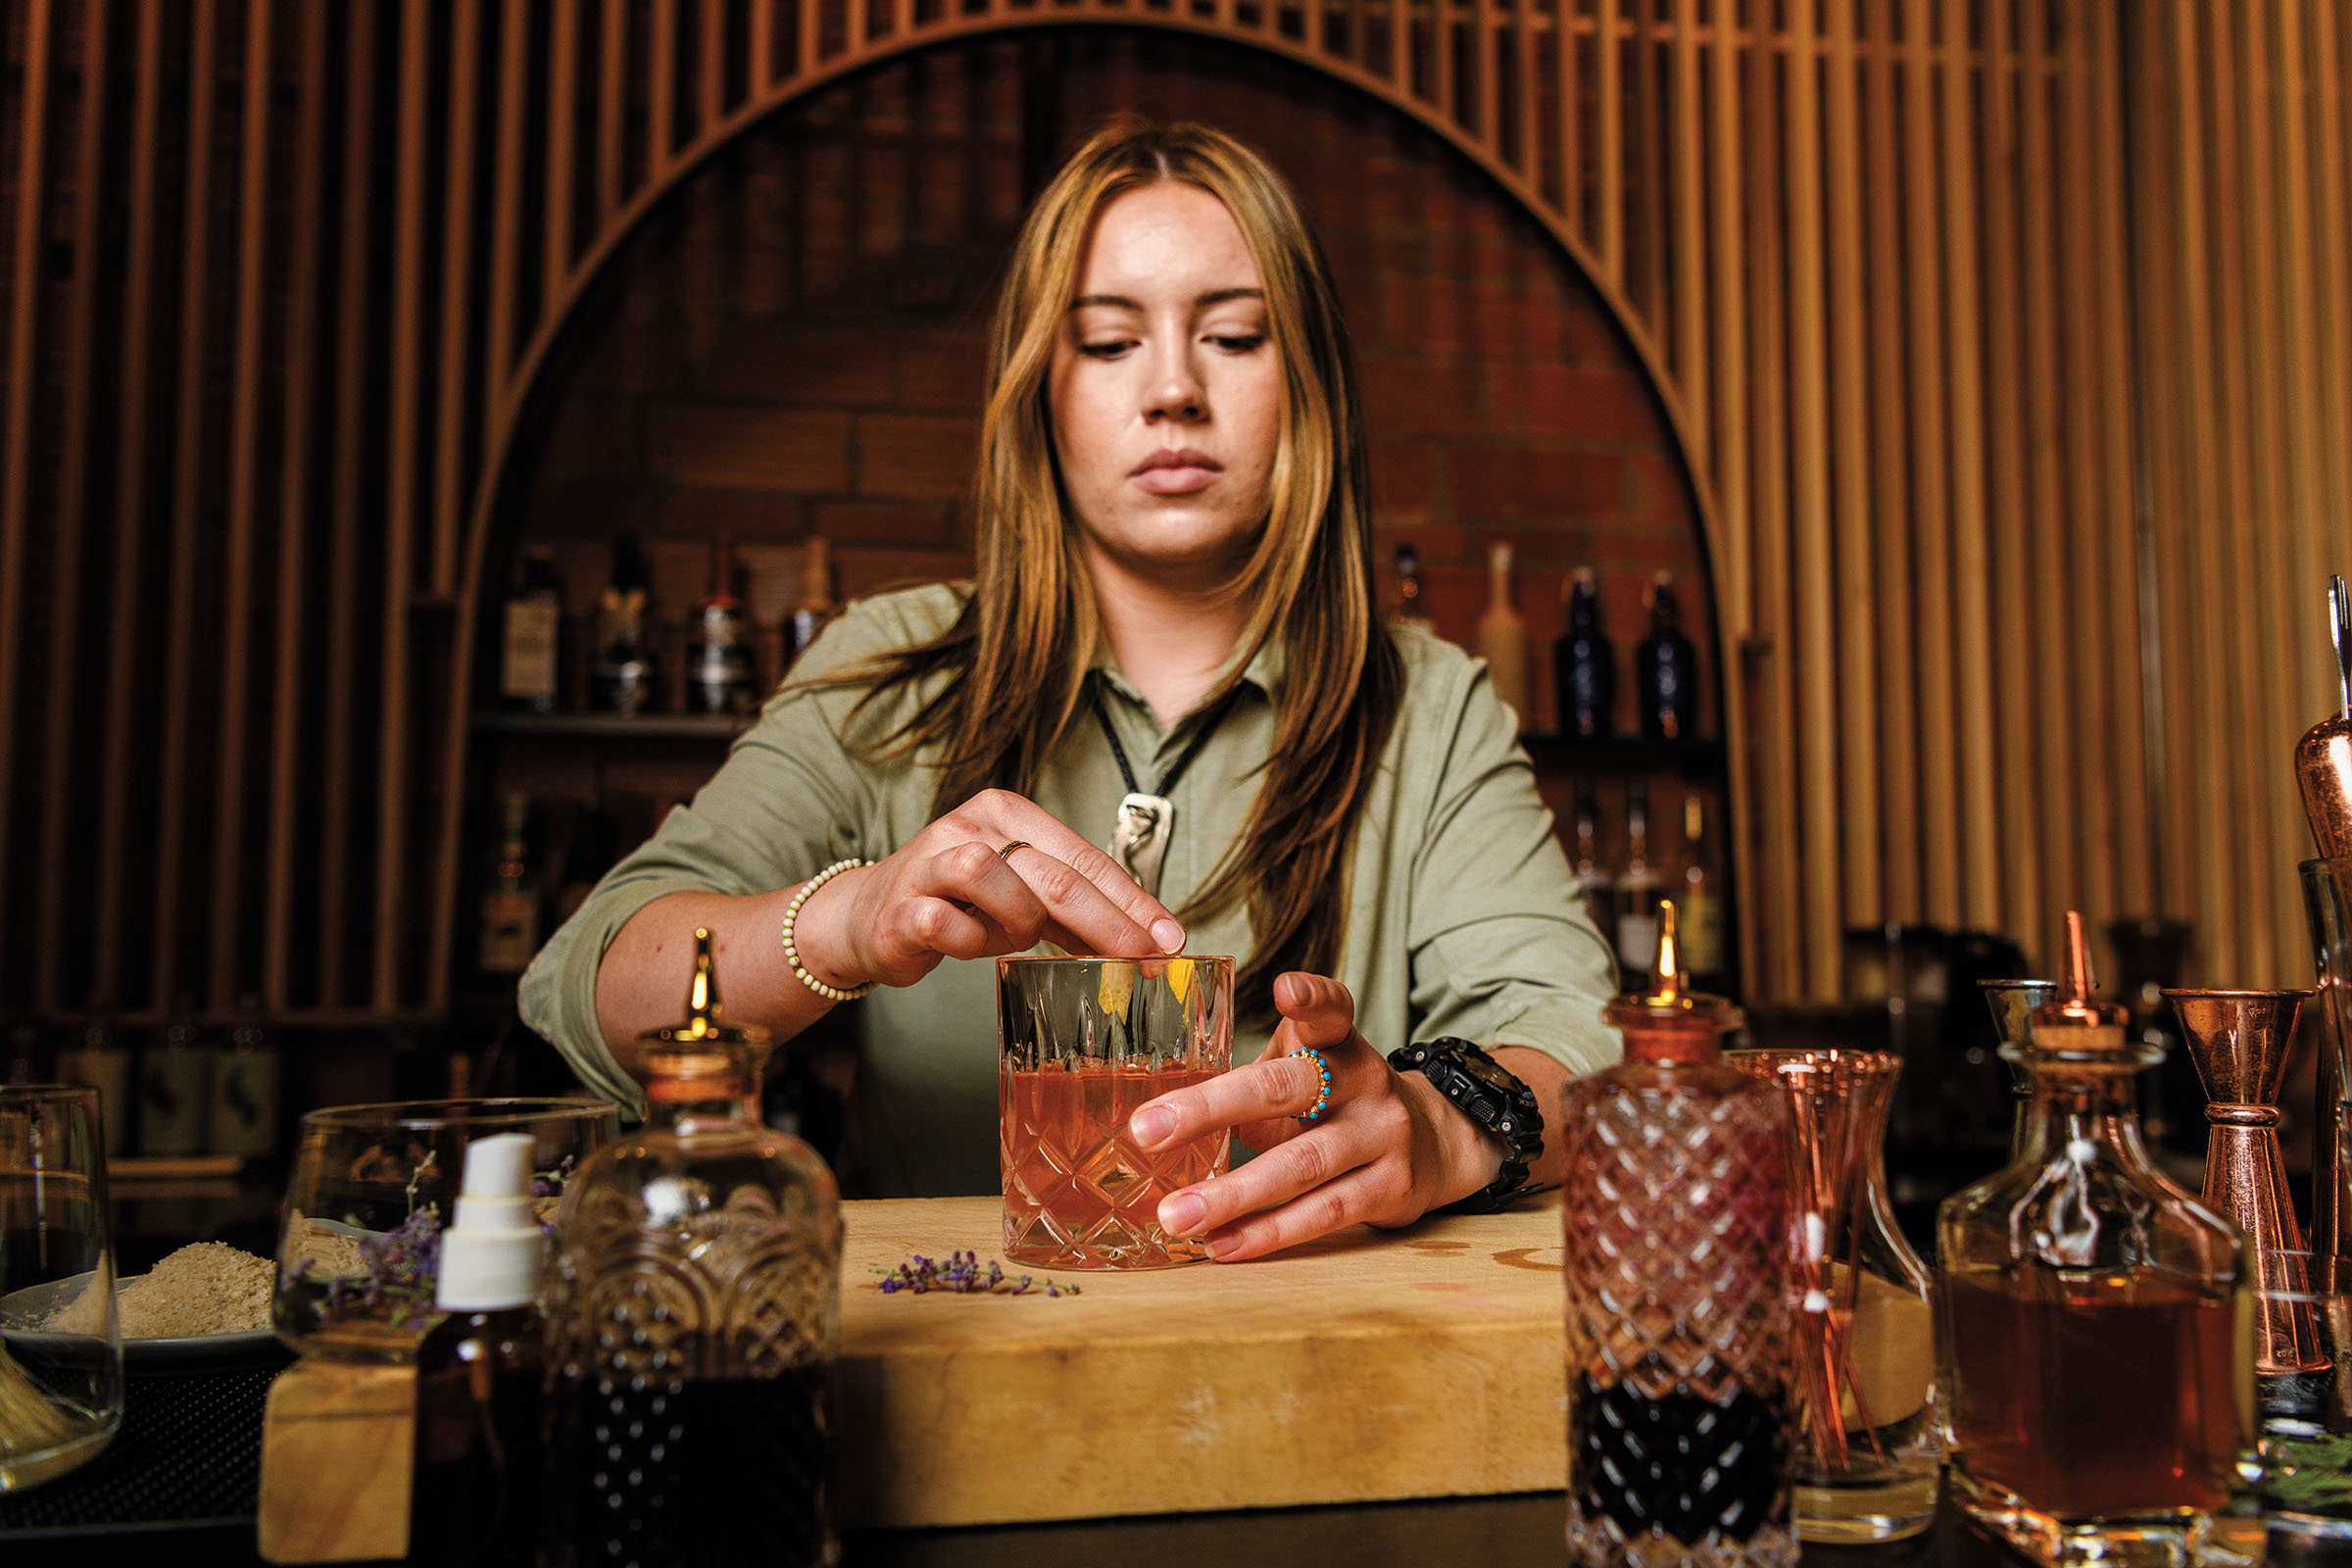 A woman wearing a green shirt makes a craft cocktail in a Collins glass in a rich wood bar